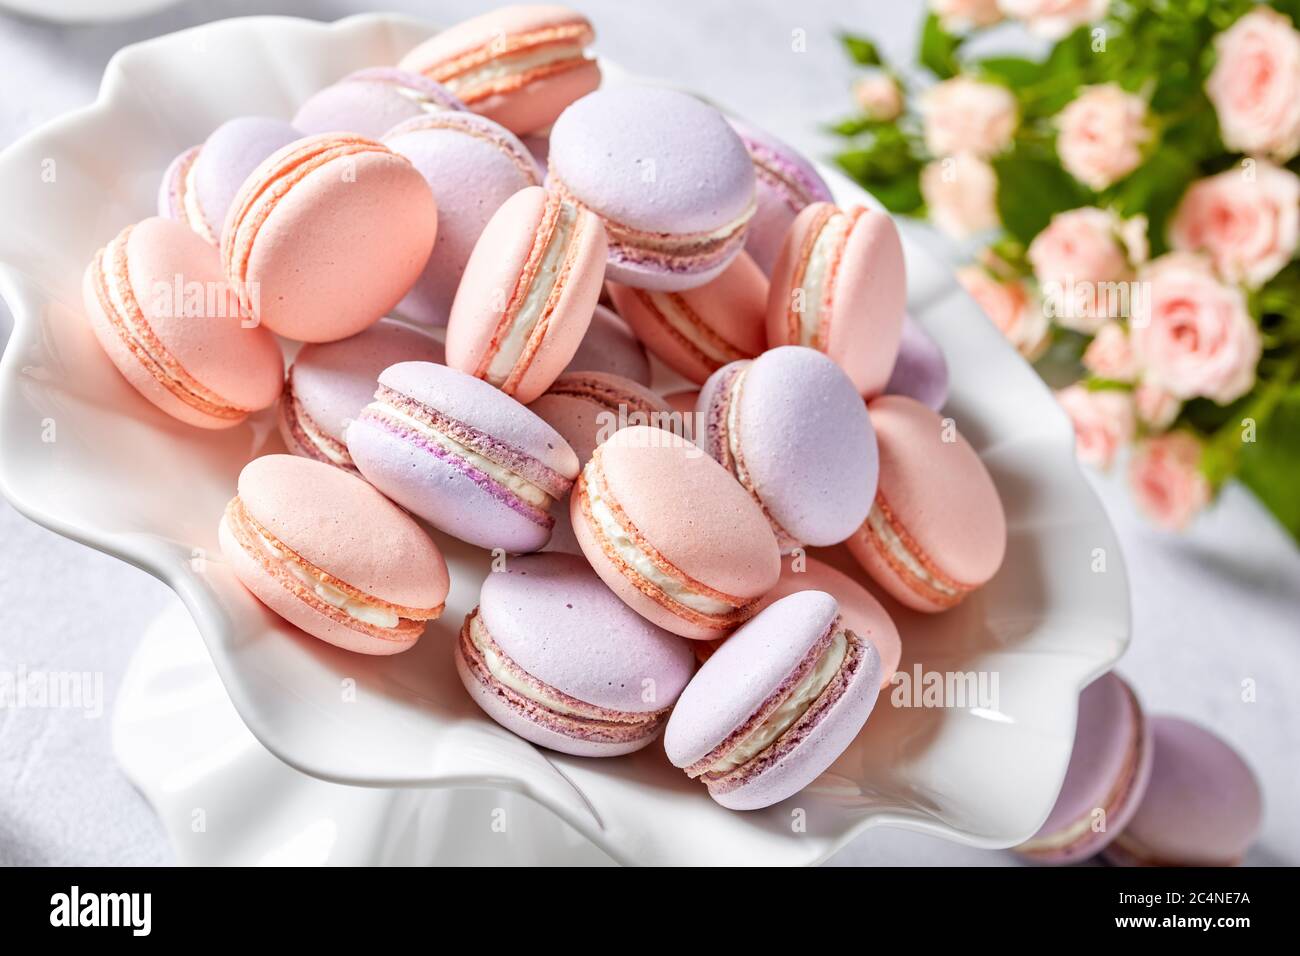 french macarons on a porcelain cake stand with beautiful bouquet of roses and creamer at the background, horizontal view, close-up, macro Stock Photo